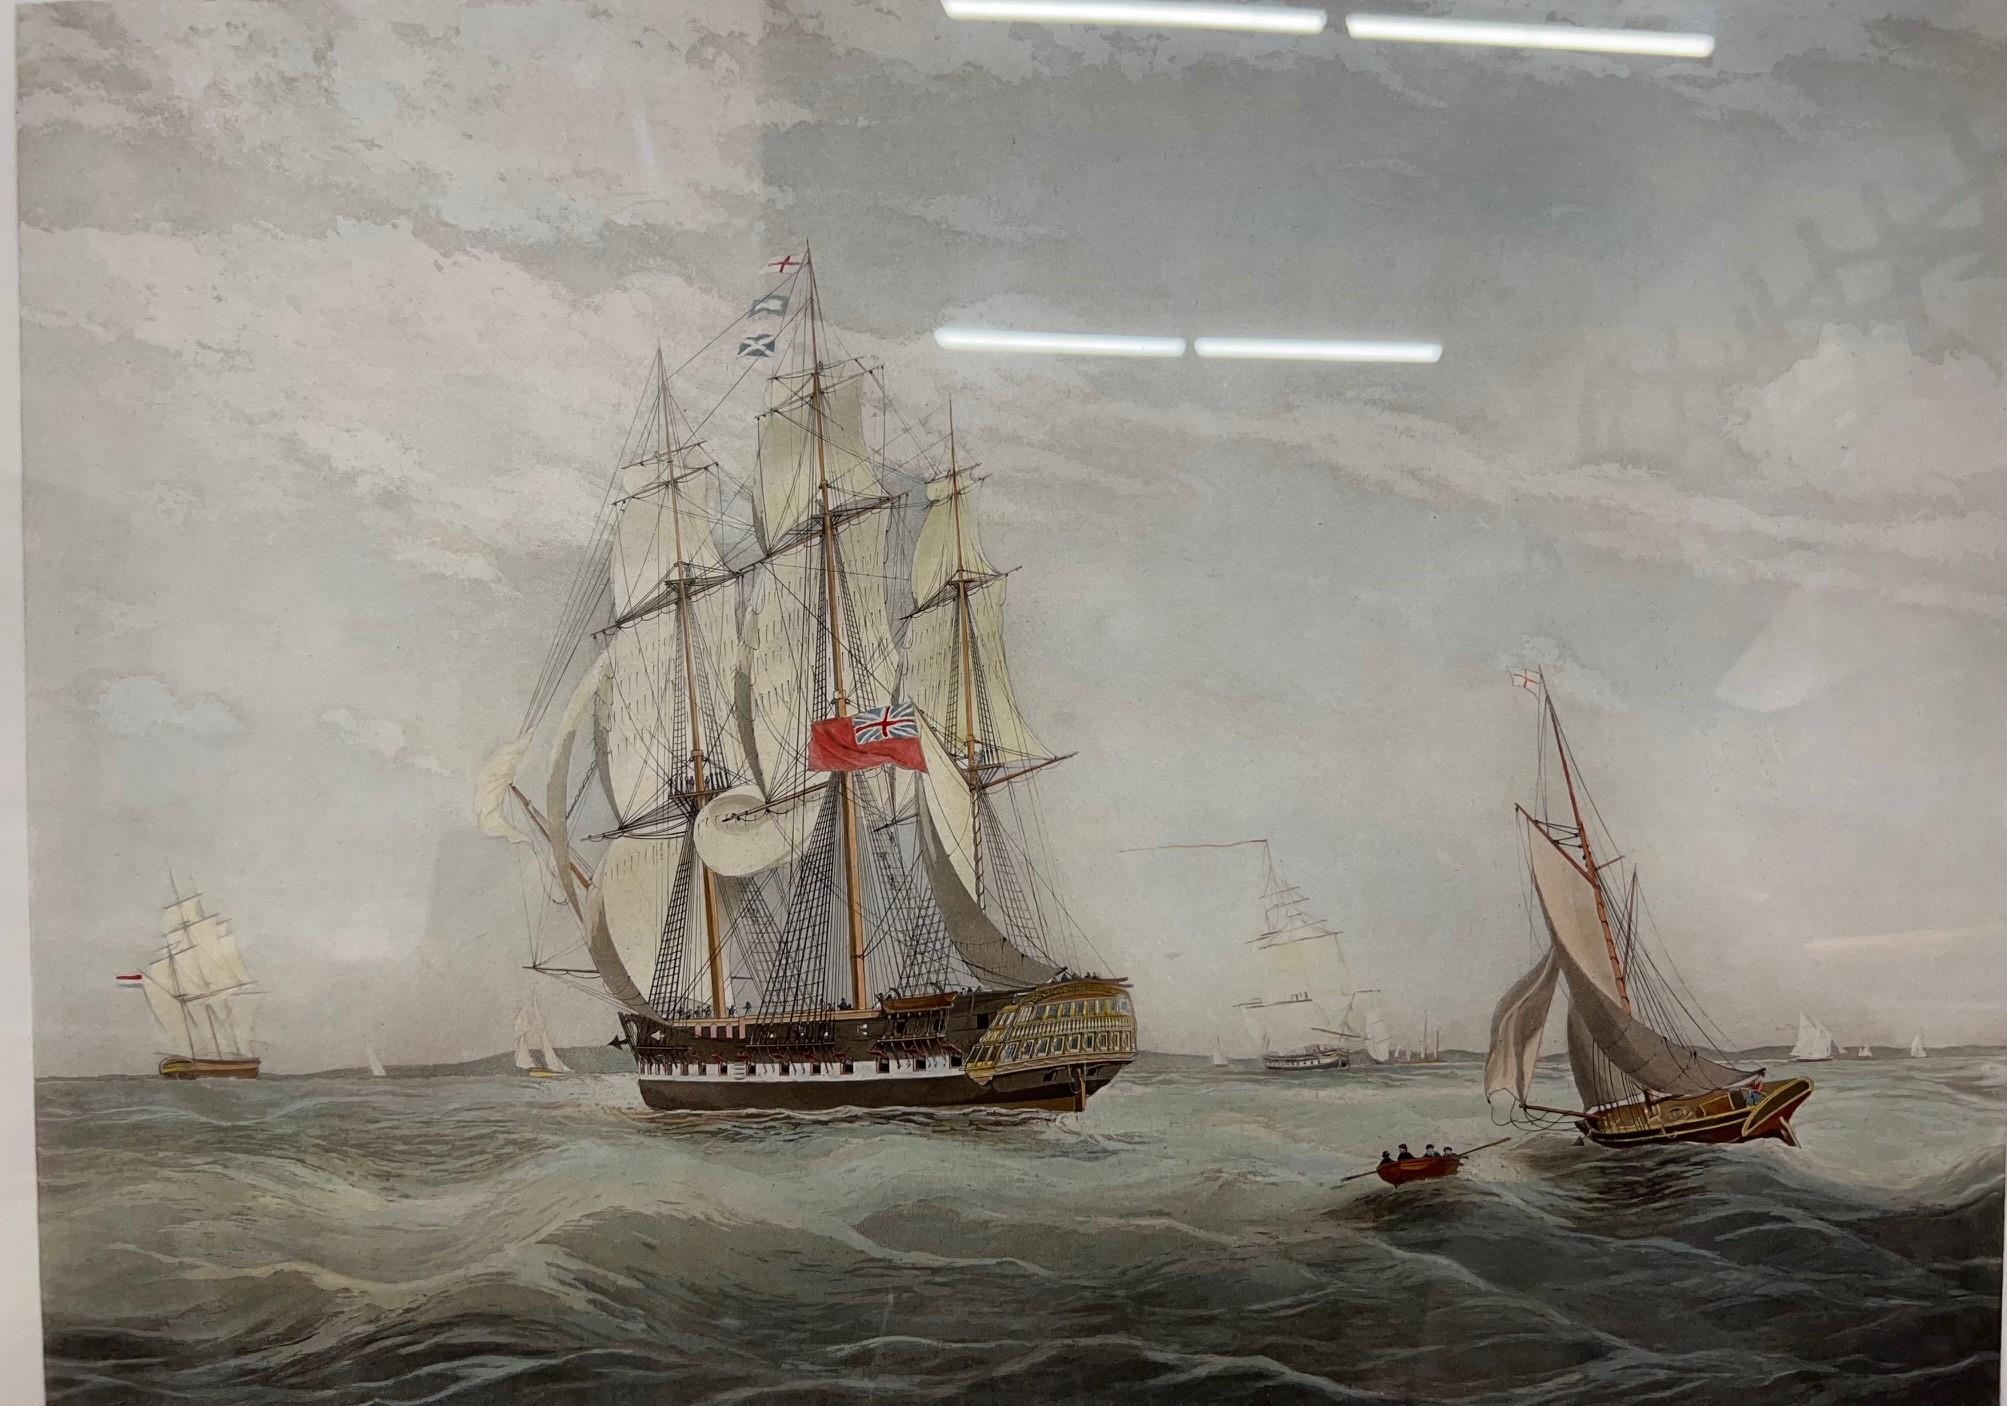 C. ROSENBERG, H.C.S. MACQUEEN OFF THE START 26TH JANUARY 1832, COLOURED ETCHING AND HAND COLOURED - Image 2 of 11